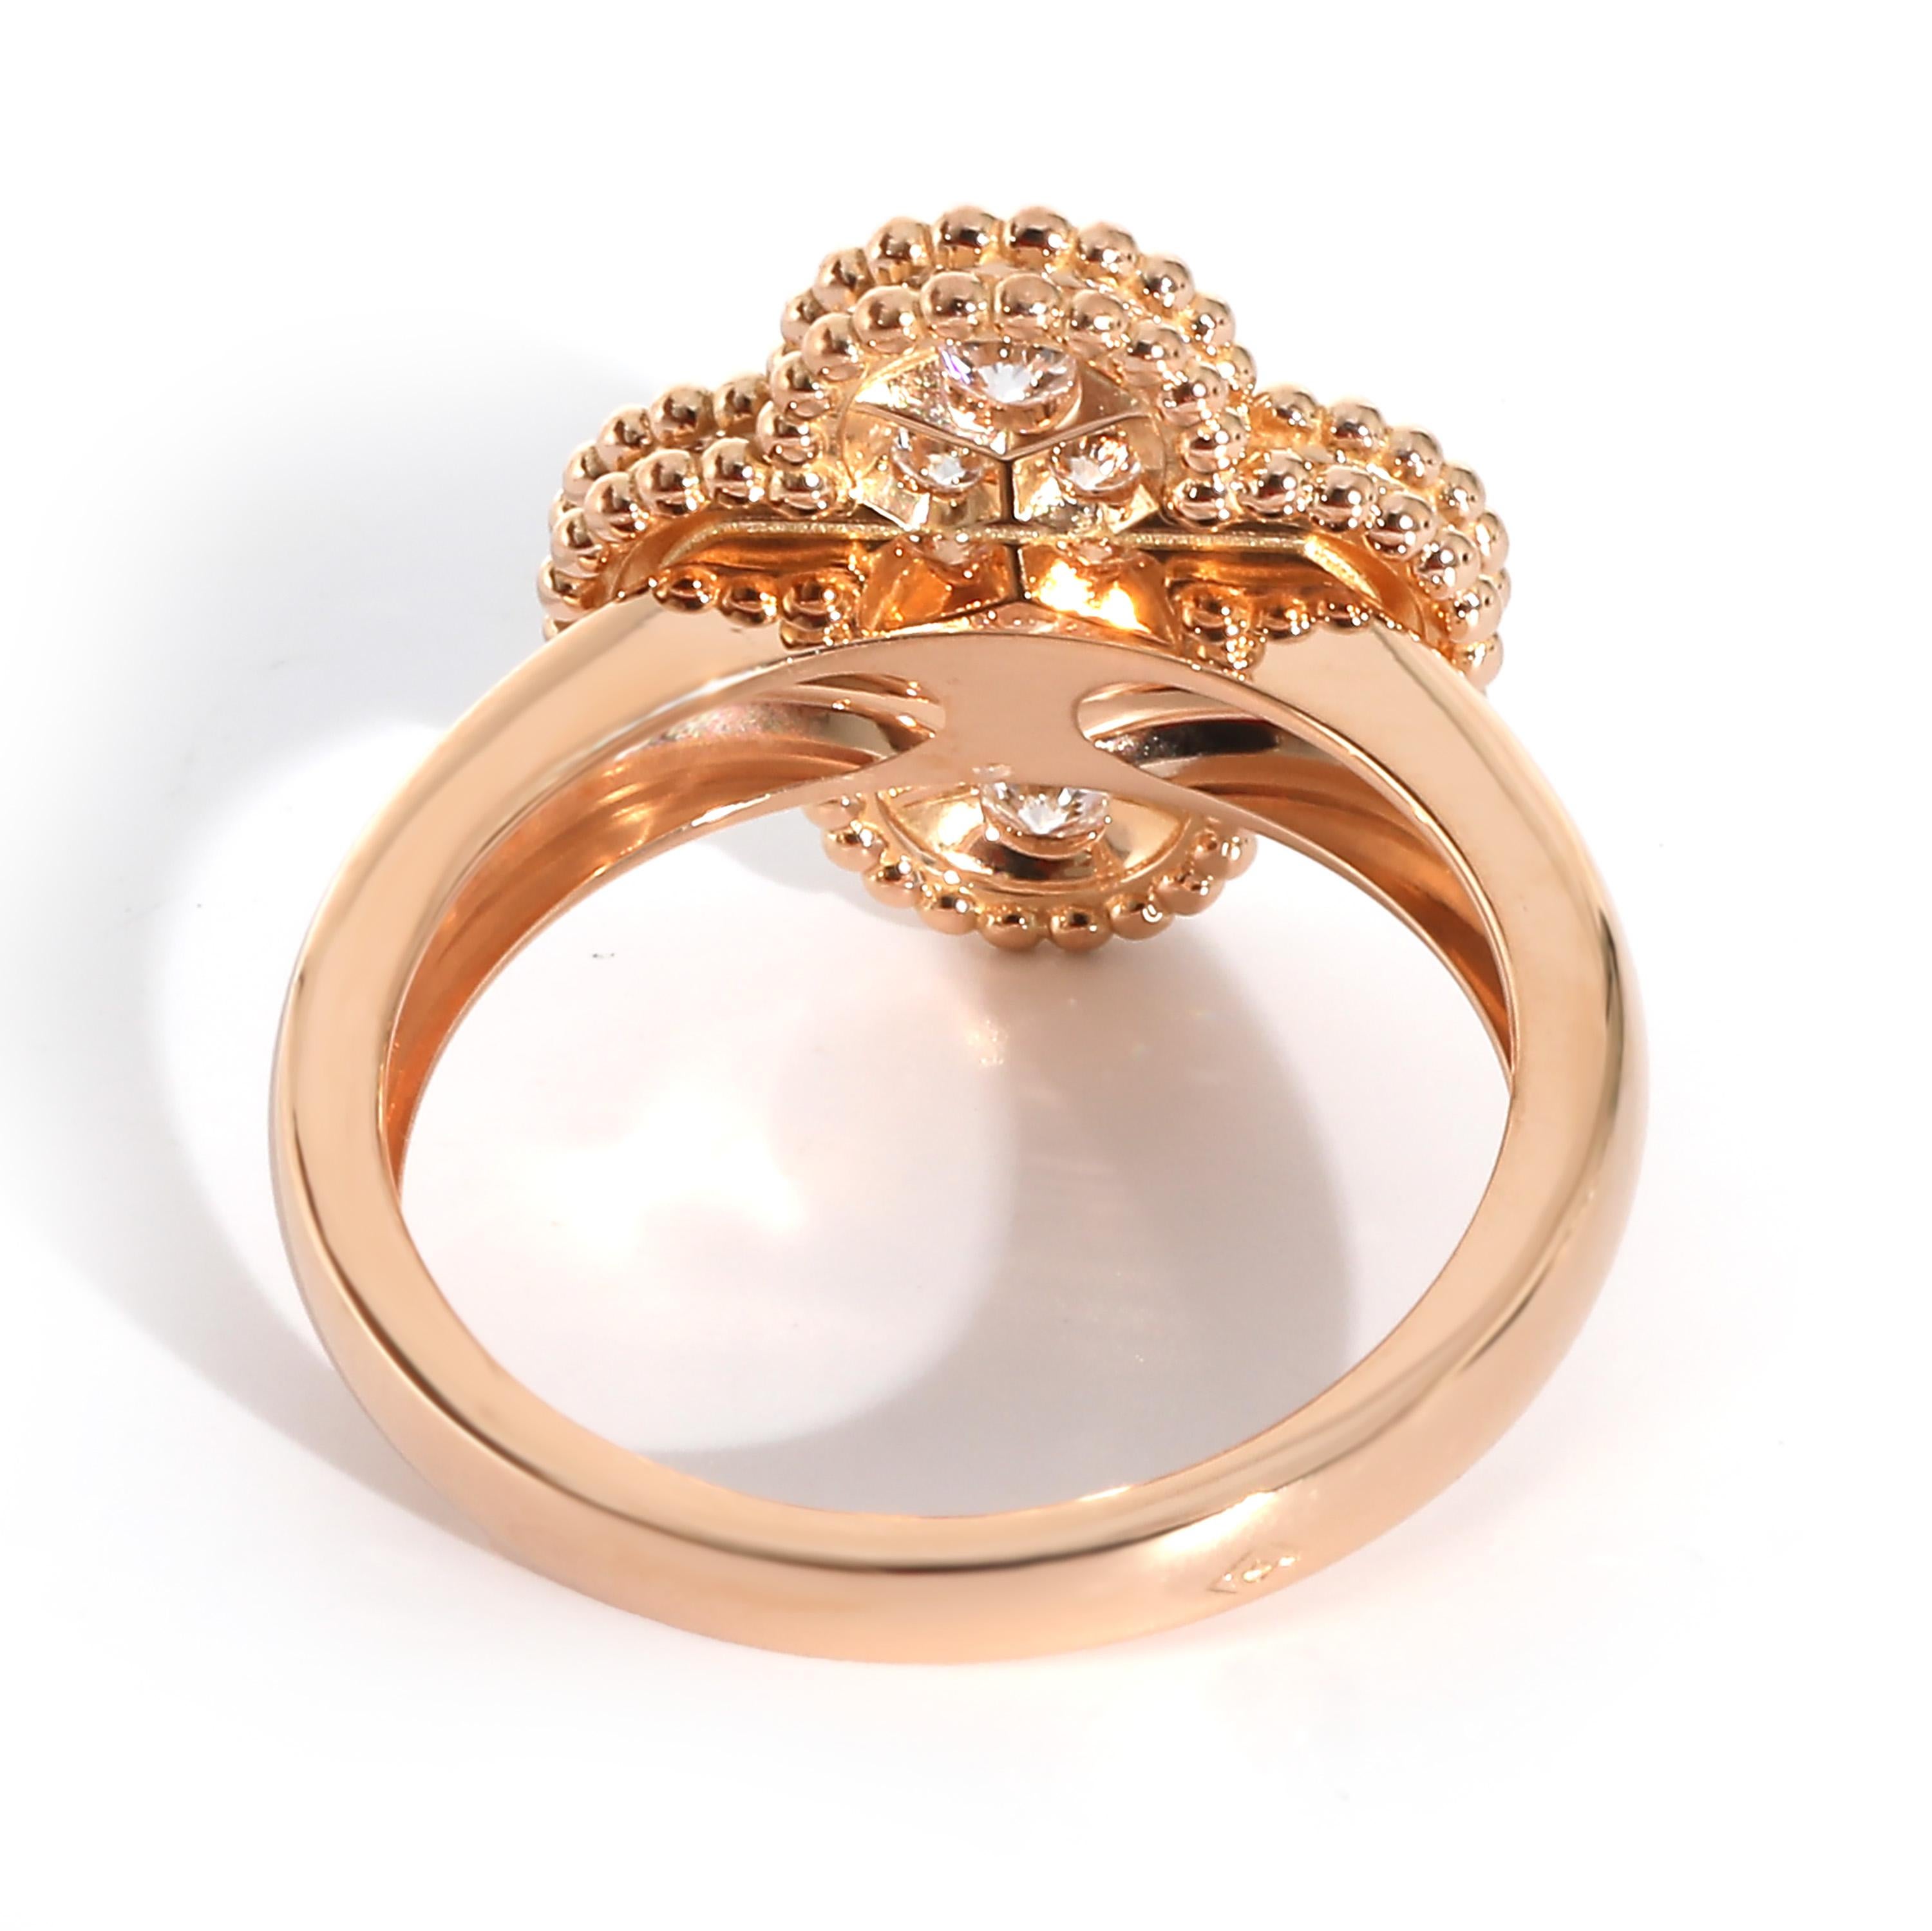 Van Cleef & Arpels Alhambra Diamond Ring in 18k Rose Gold 0.48 CTW

PRIMARY DETAILS
SKU: 132392
Listing Title: Van Cleef & Arpels Alhambra Diamond Ring in 18k Rose Gold 0.48 CTW
Condition Description: Launched in 1968, the Alhambra collection from